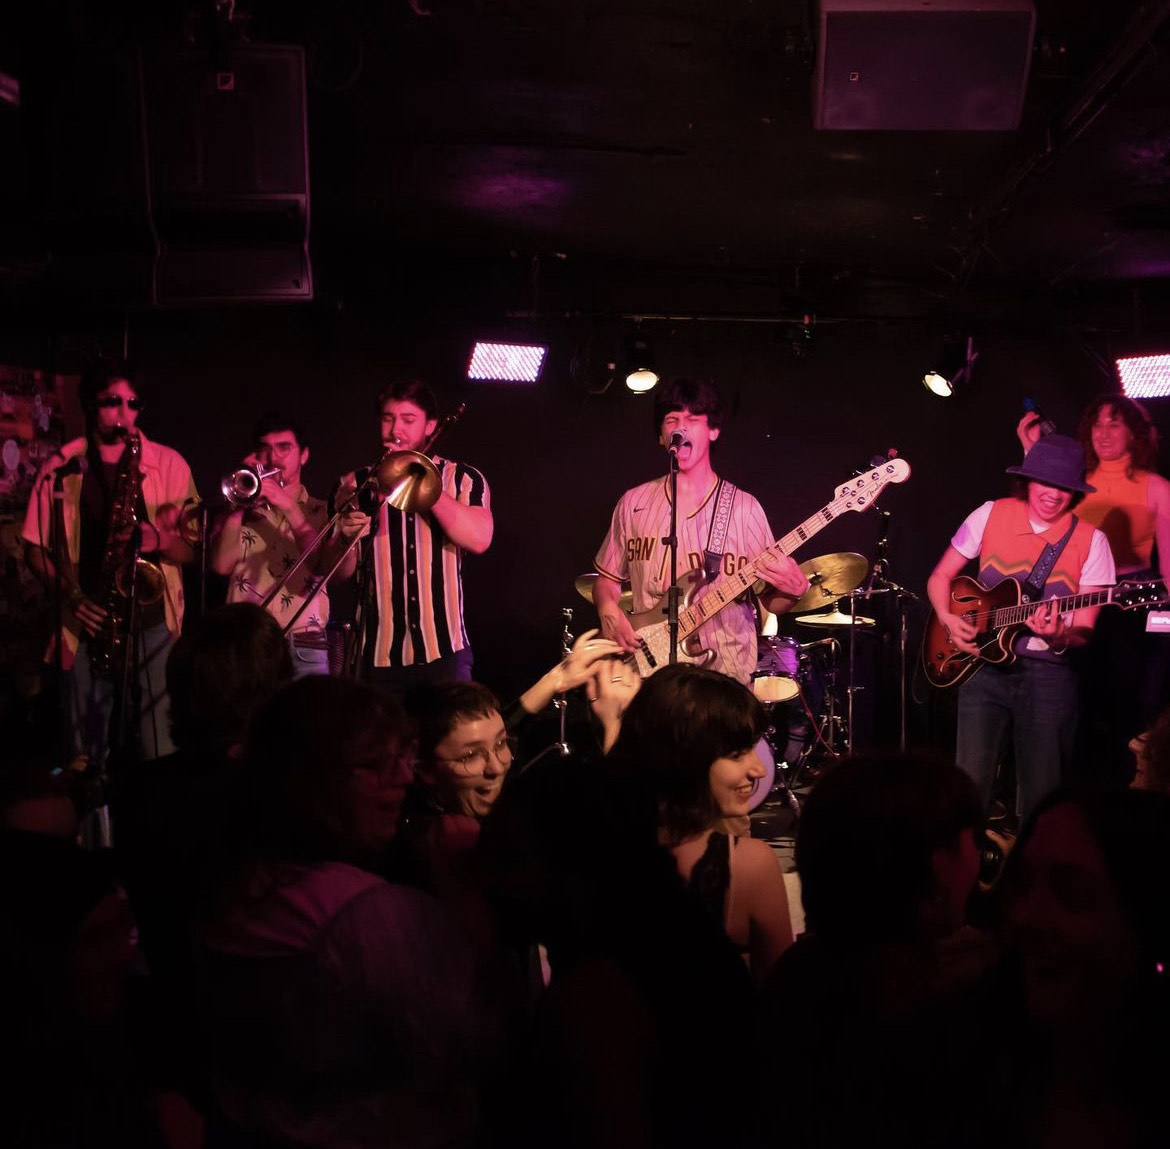 Bands, Bras, and The Blind Pig – A Review of Ann Arbor’s Student Bands